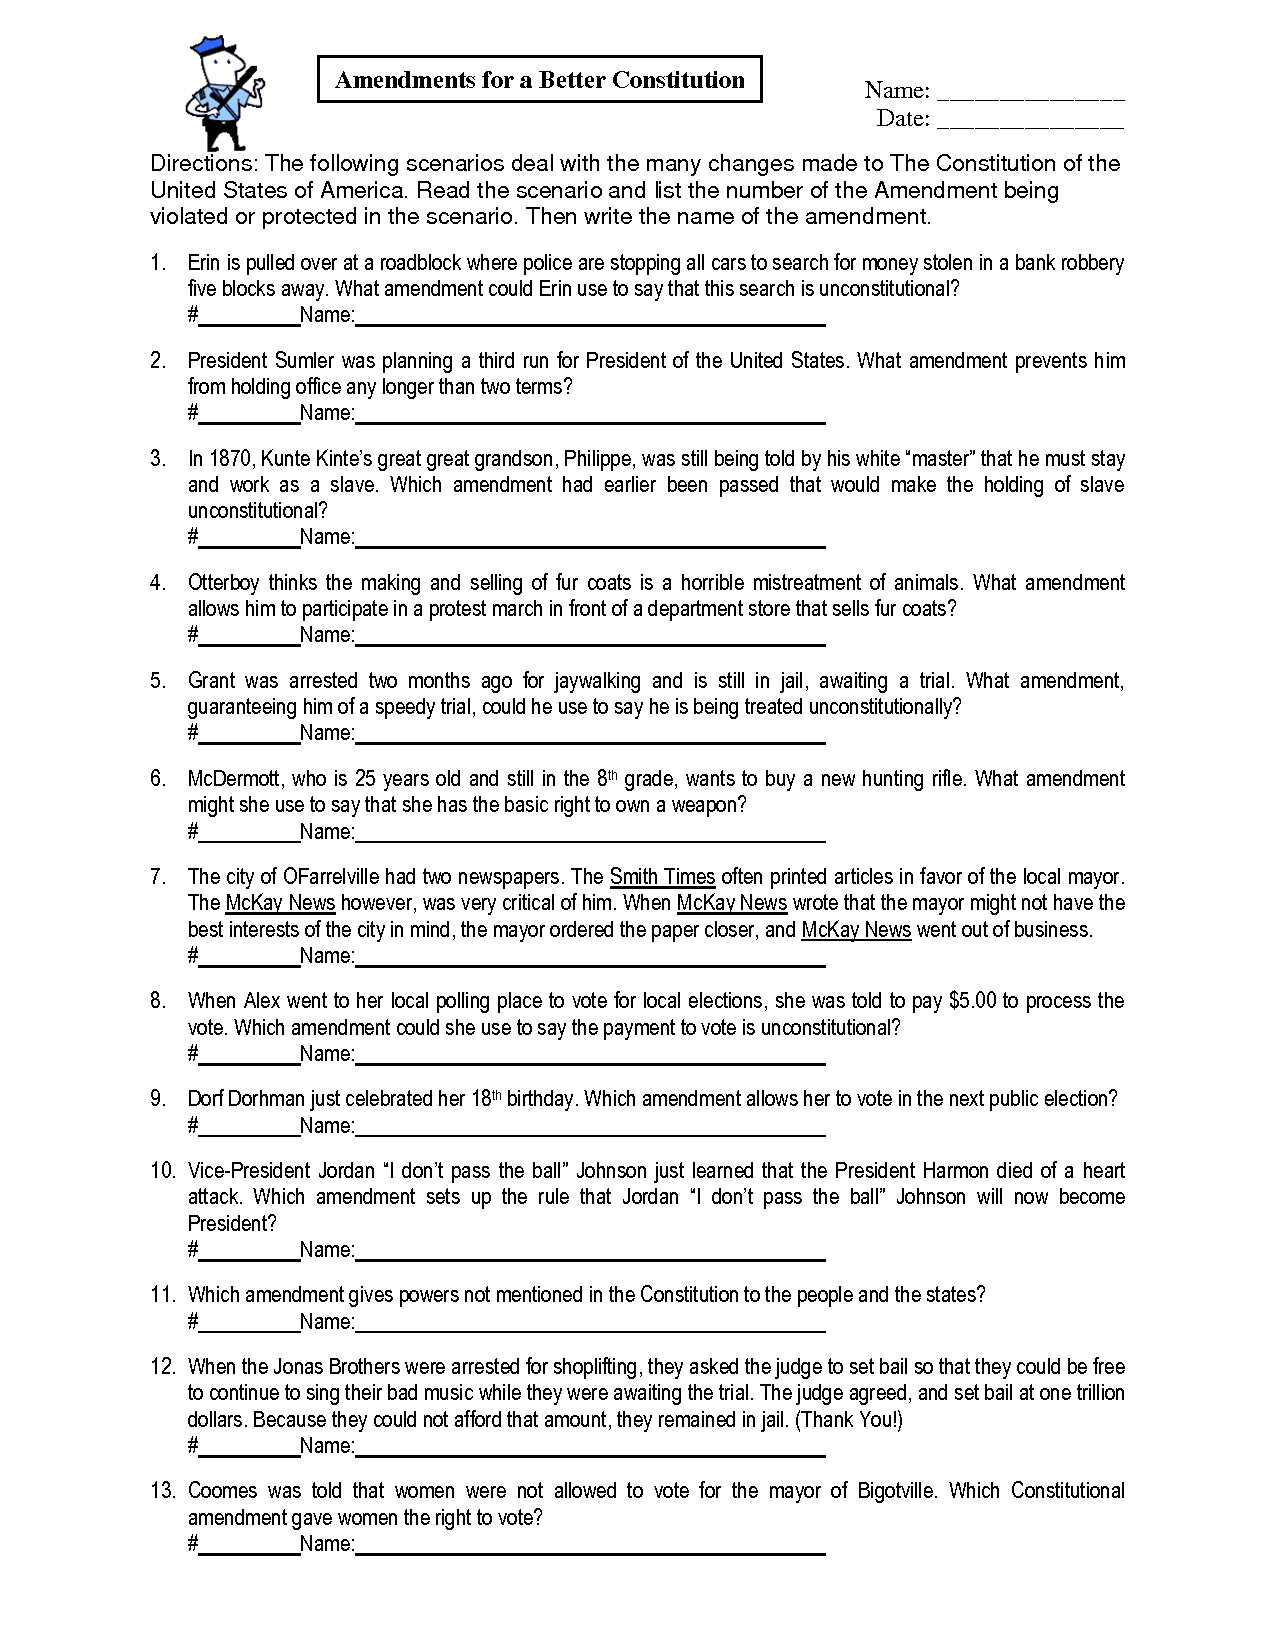 18-best-images-of-amendment-1-worksheet-amendments-to-the-constitution-worksheet-answers-27